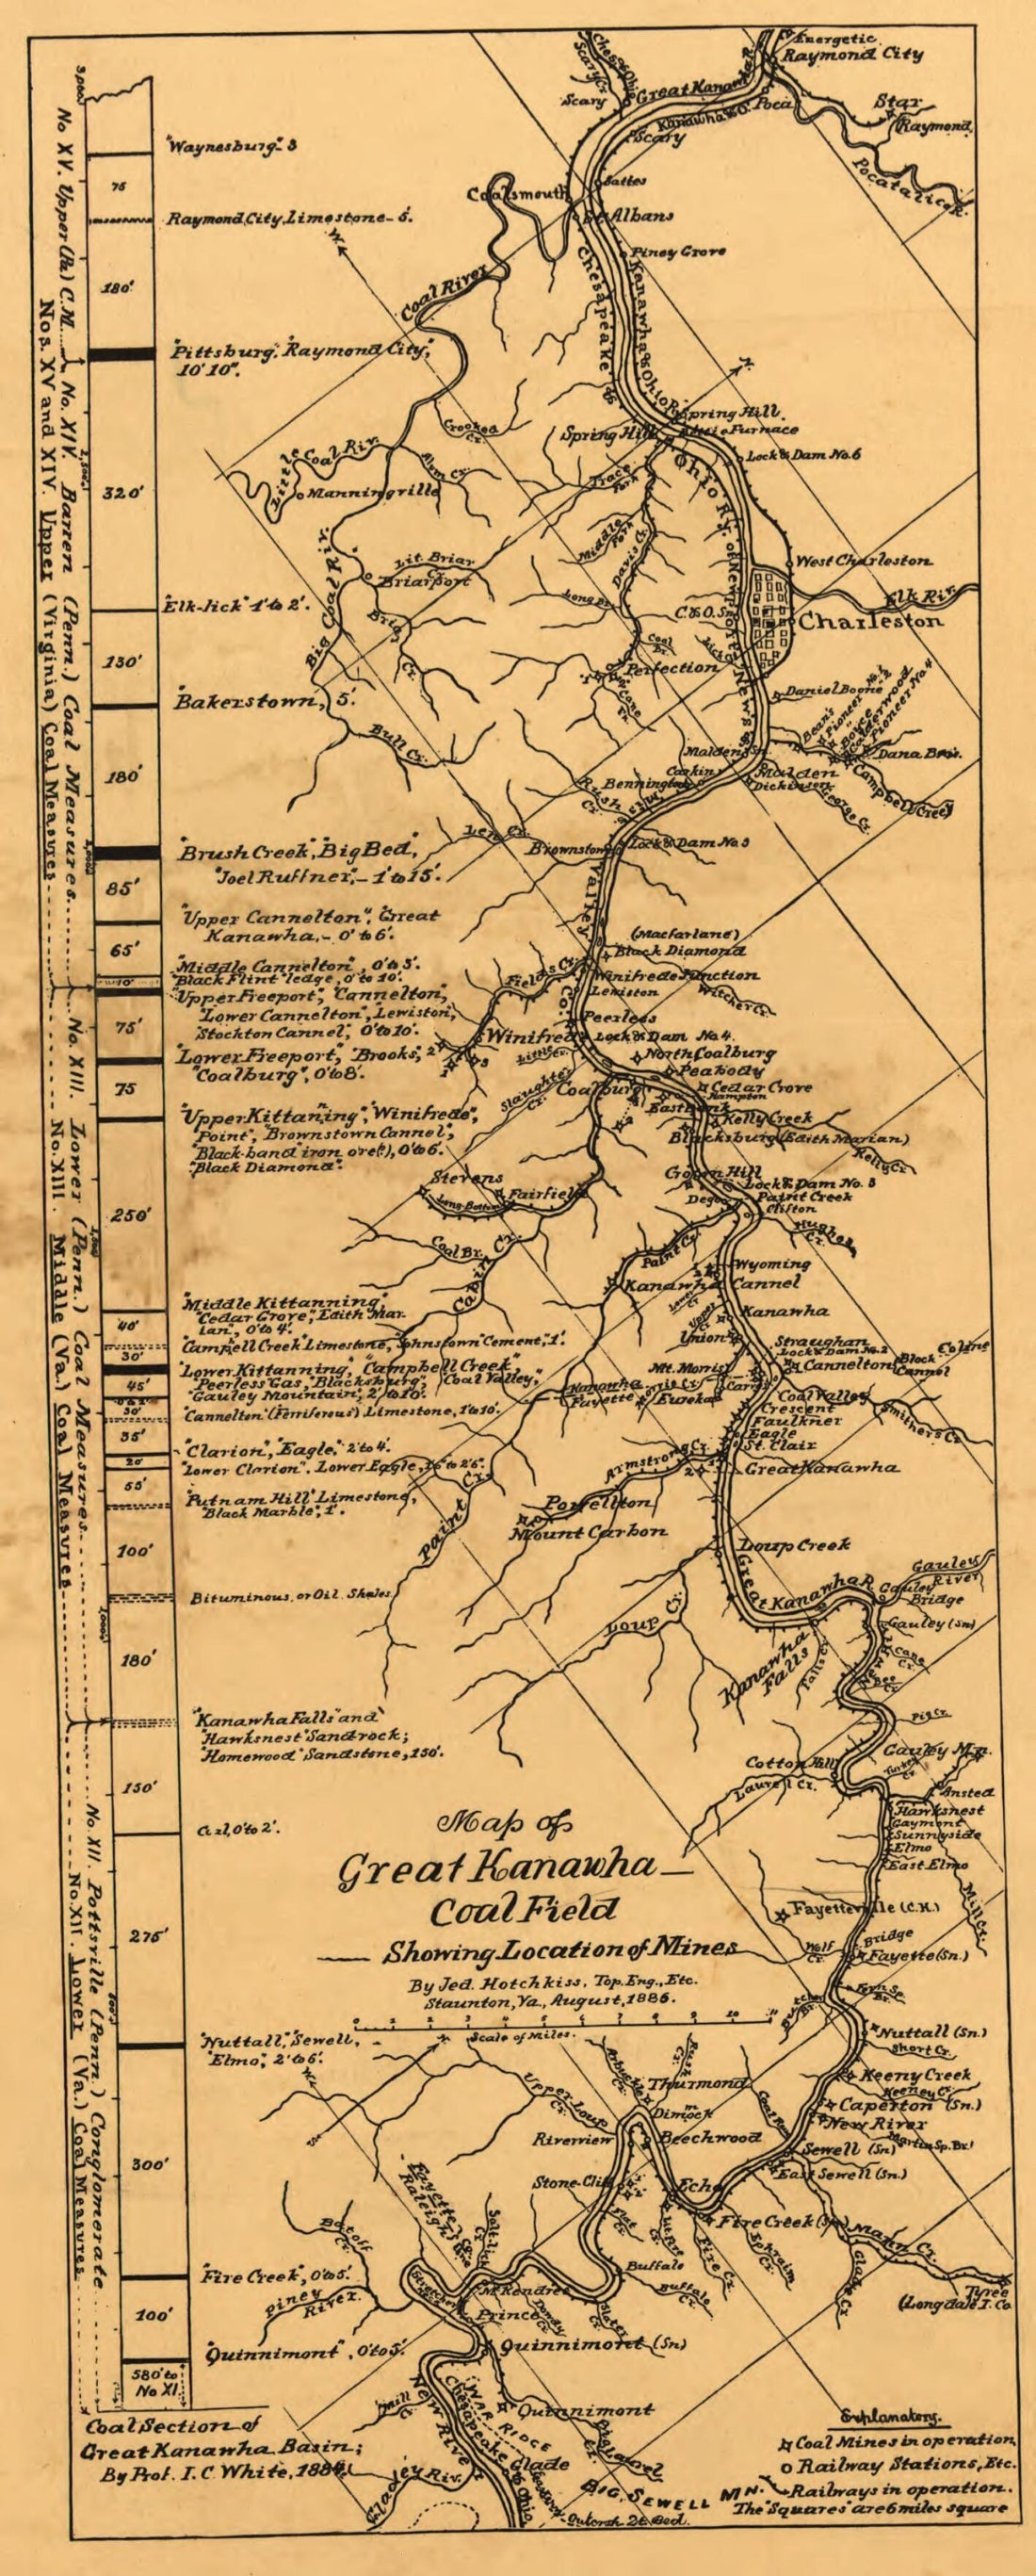 This old map of Map of Great Kanawha Coal Field Showing Location of Mines from 1886 was created by Jedediah Hotchkiss in 1886